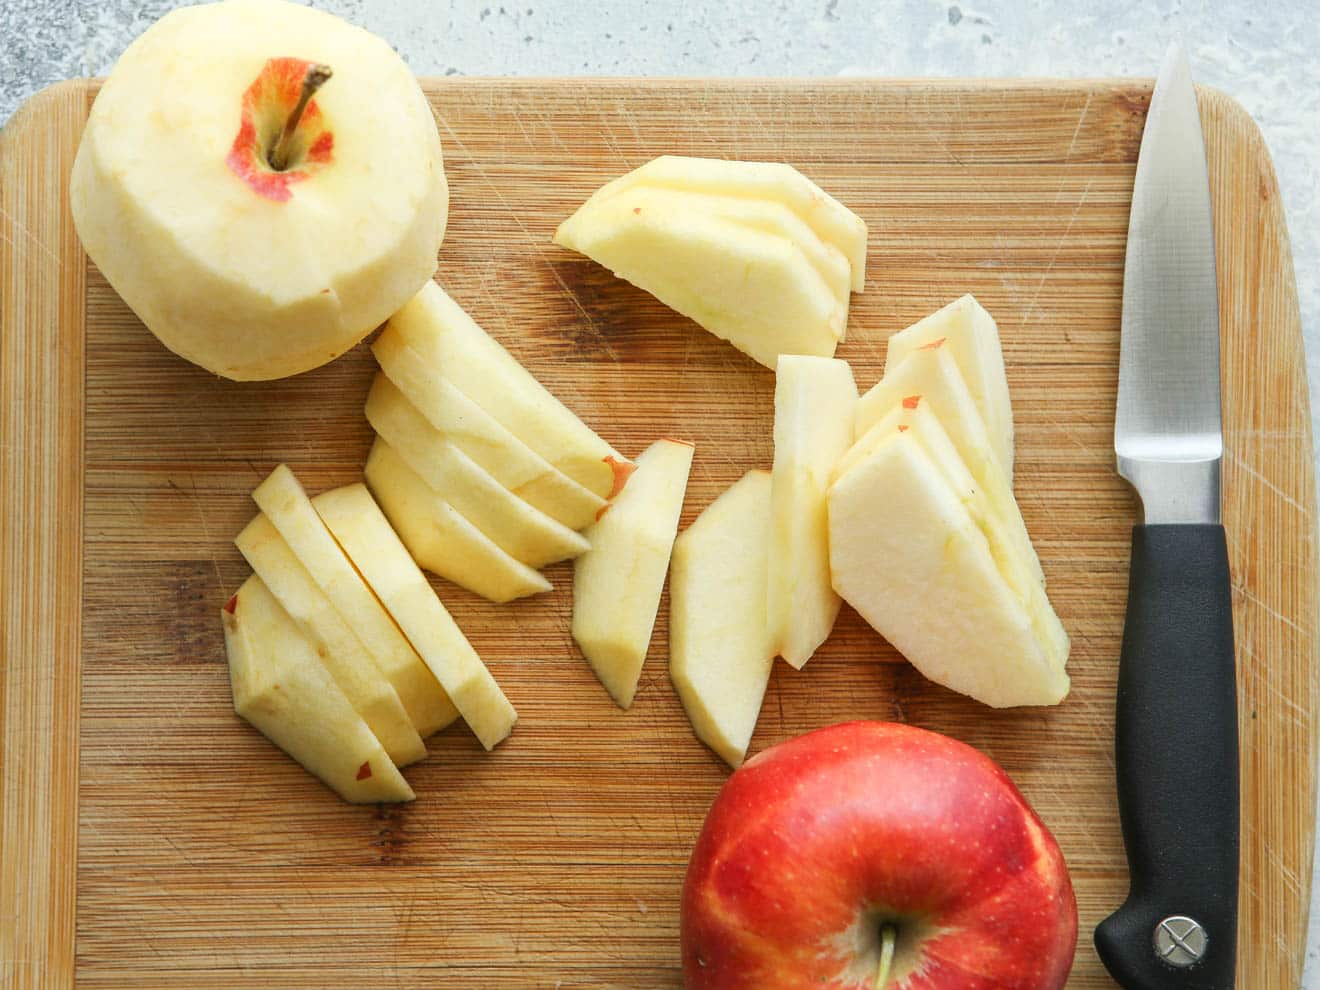 slicing apples on a cutting board